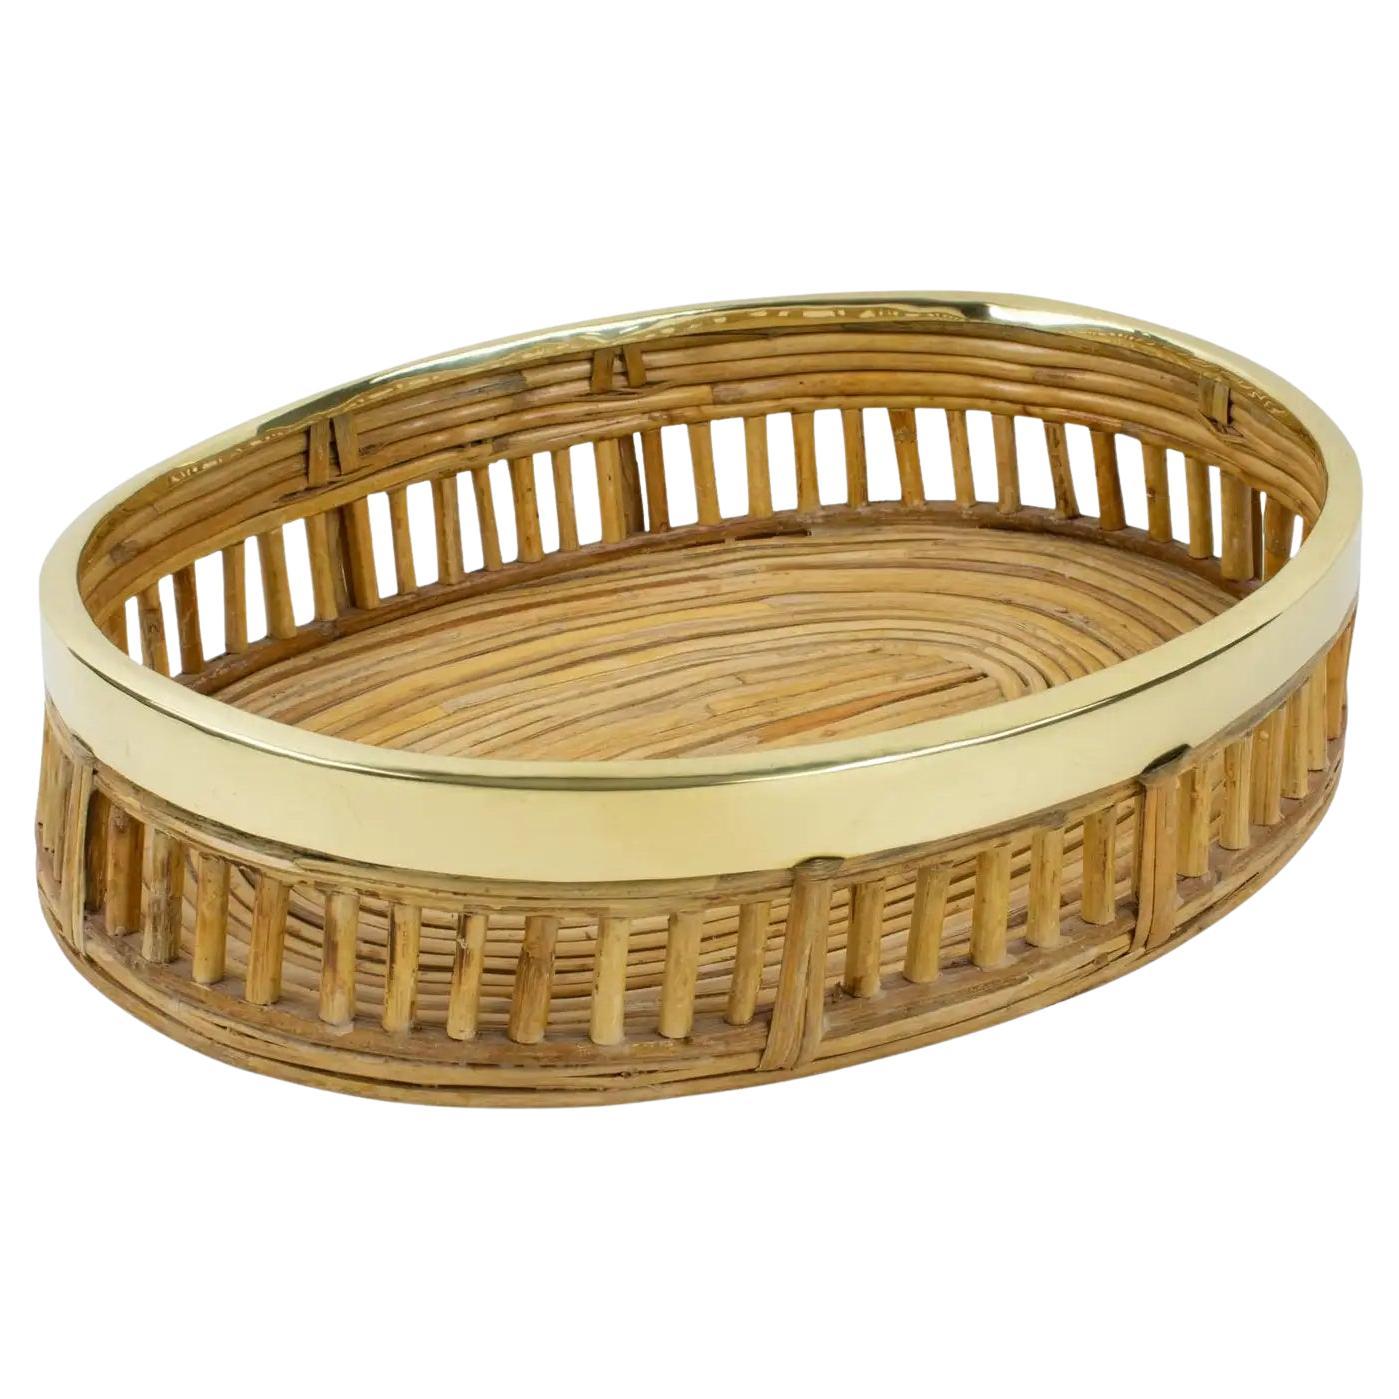 Rattan Bamboo Wicker and Brass Bowl Basket Centerpiece, Italy 1960s For Sale